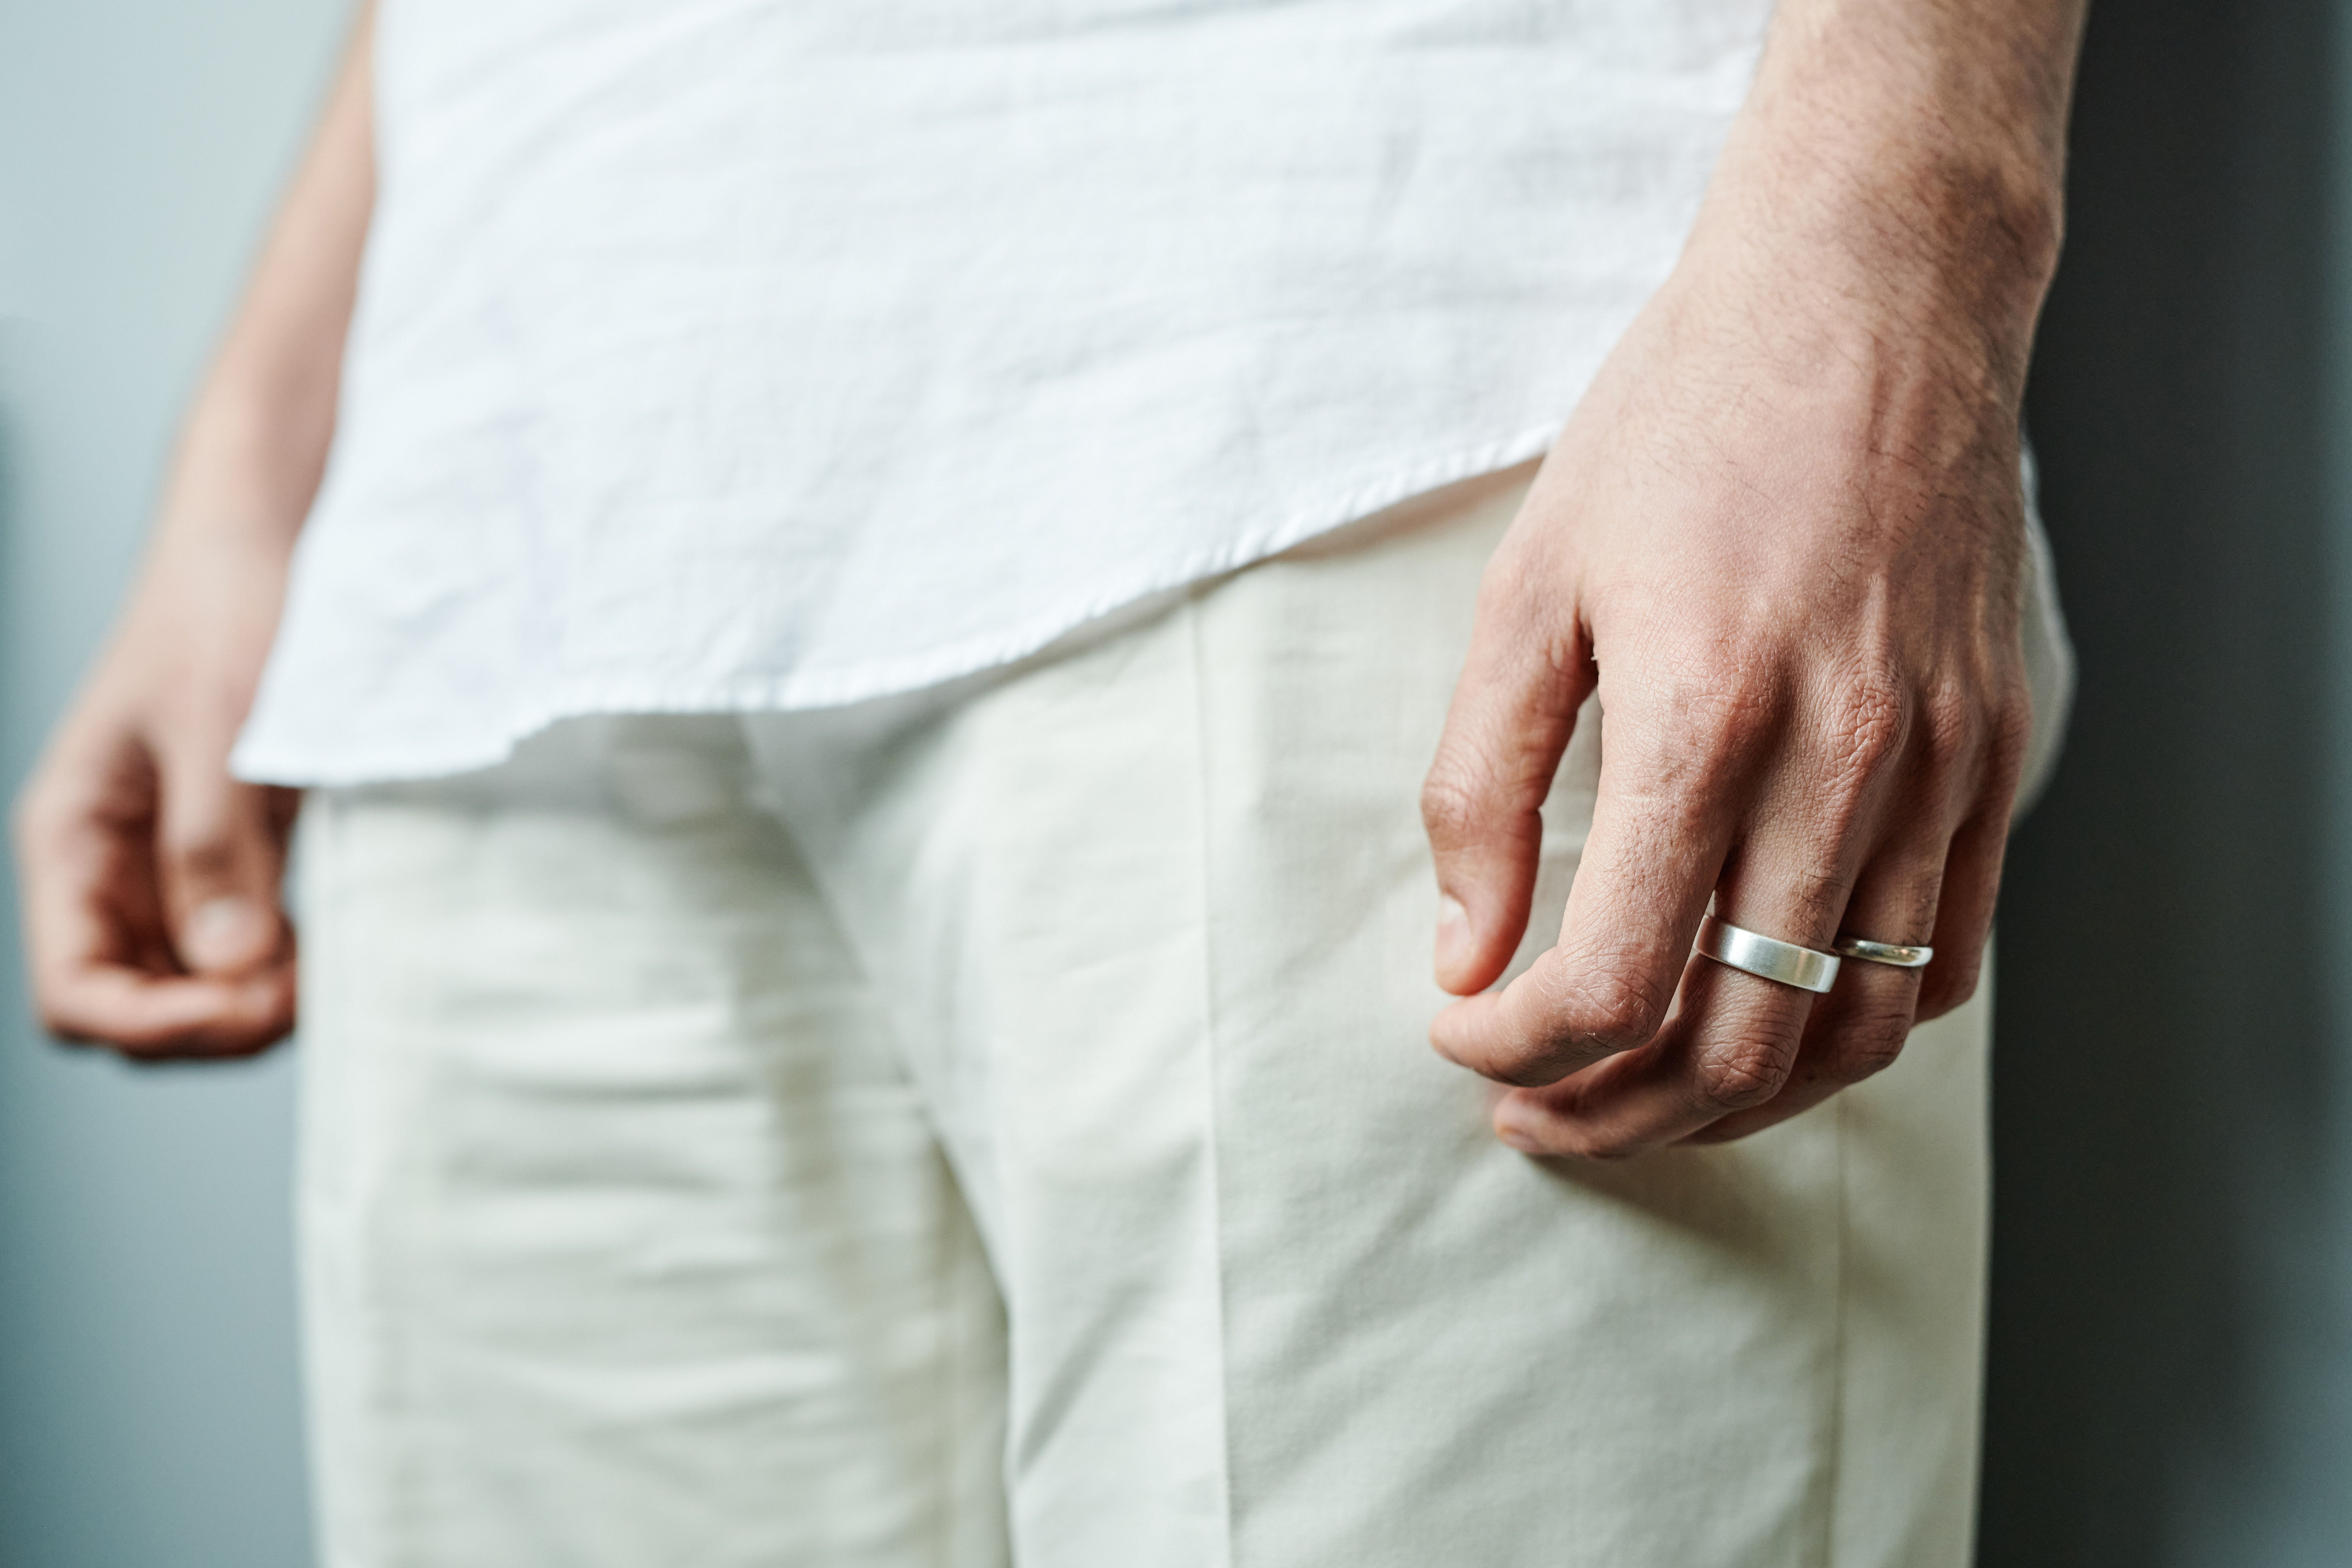 The woman notices her recently widowed colleague still wearing his wedding ring | Photo: Pexels